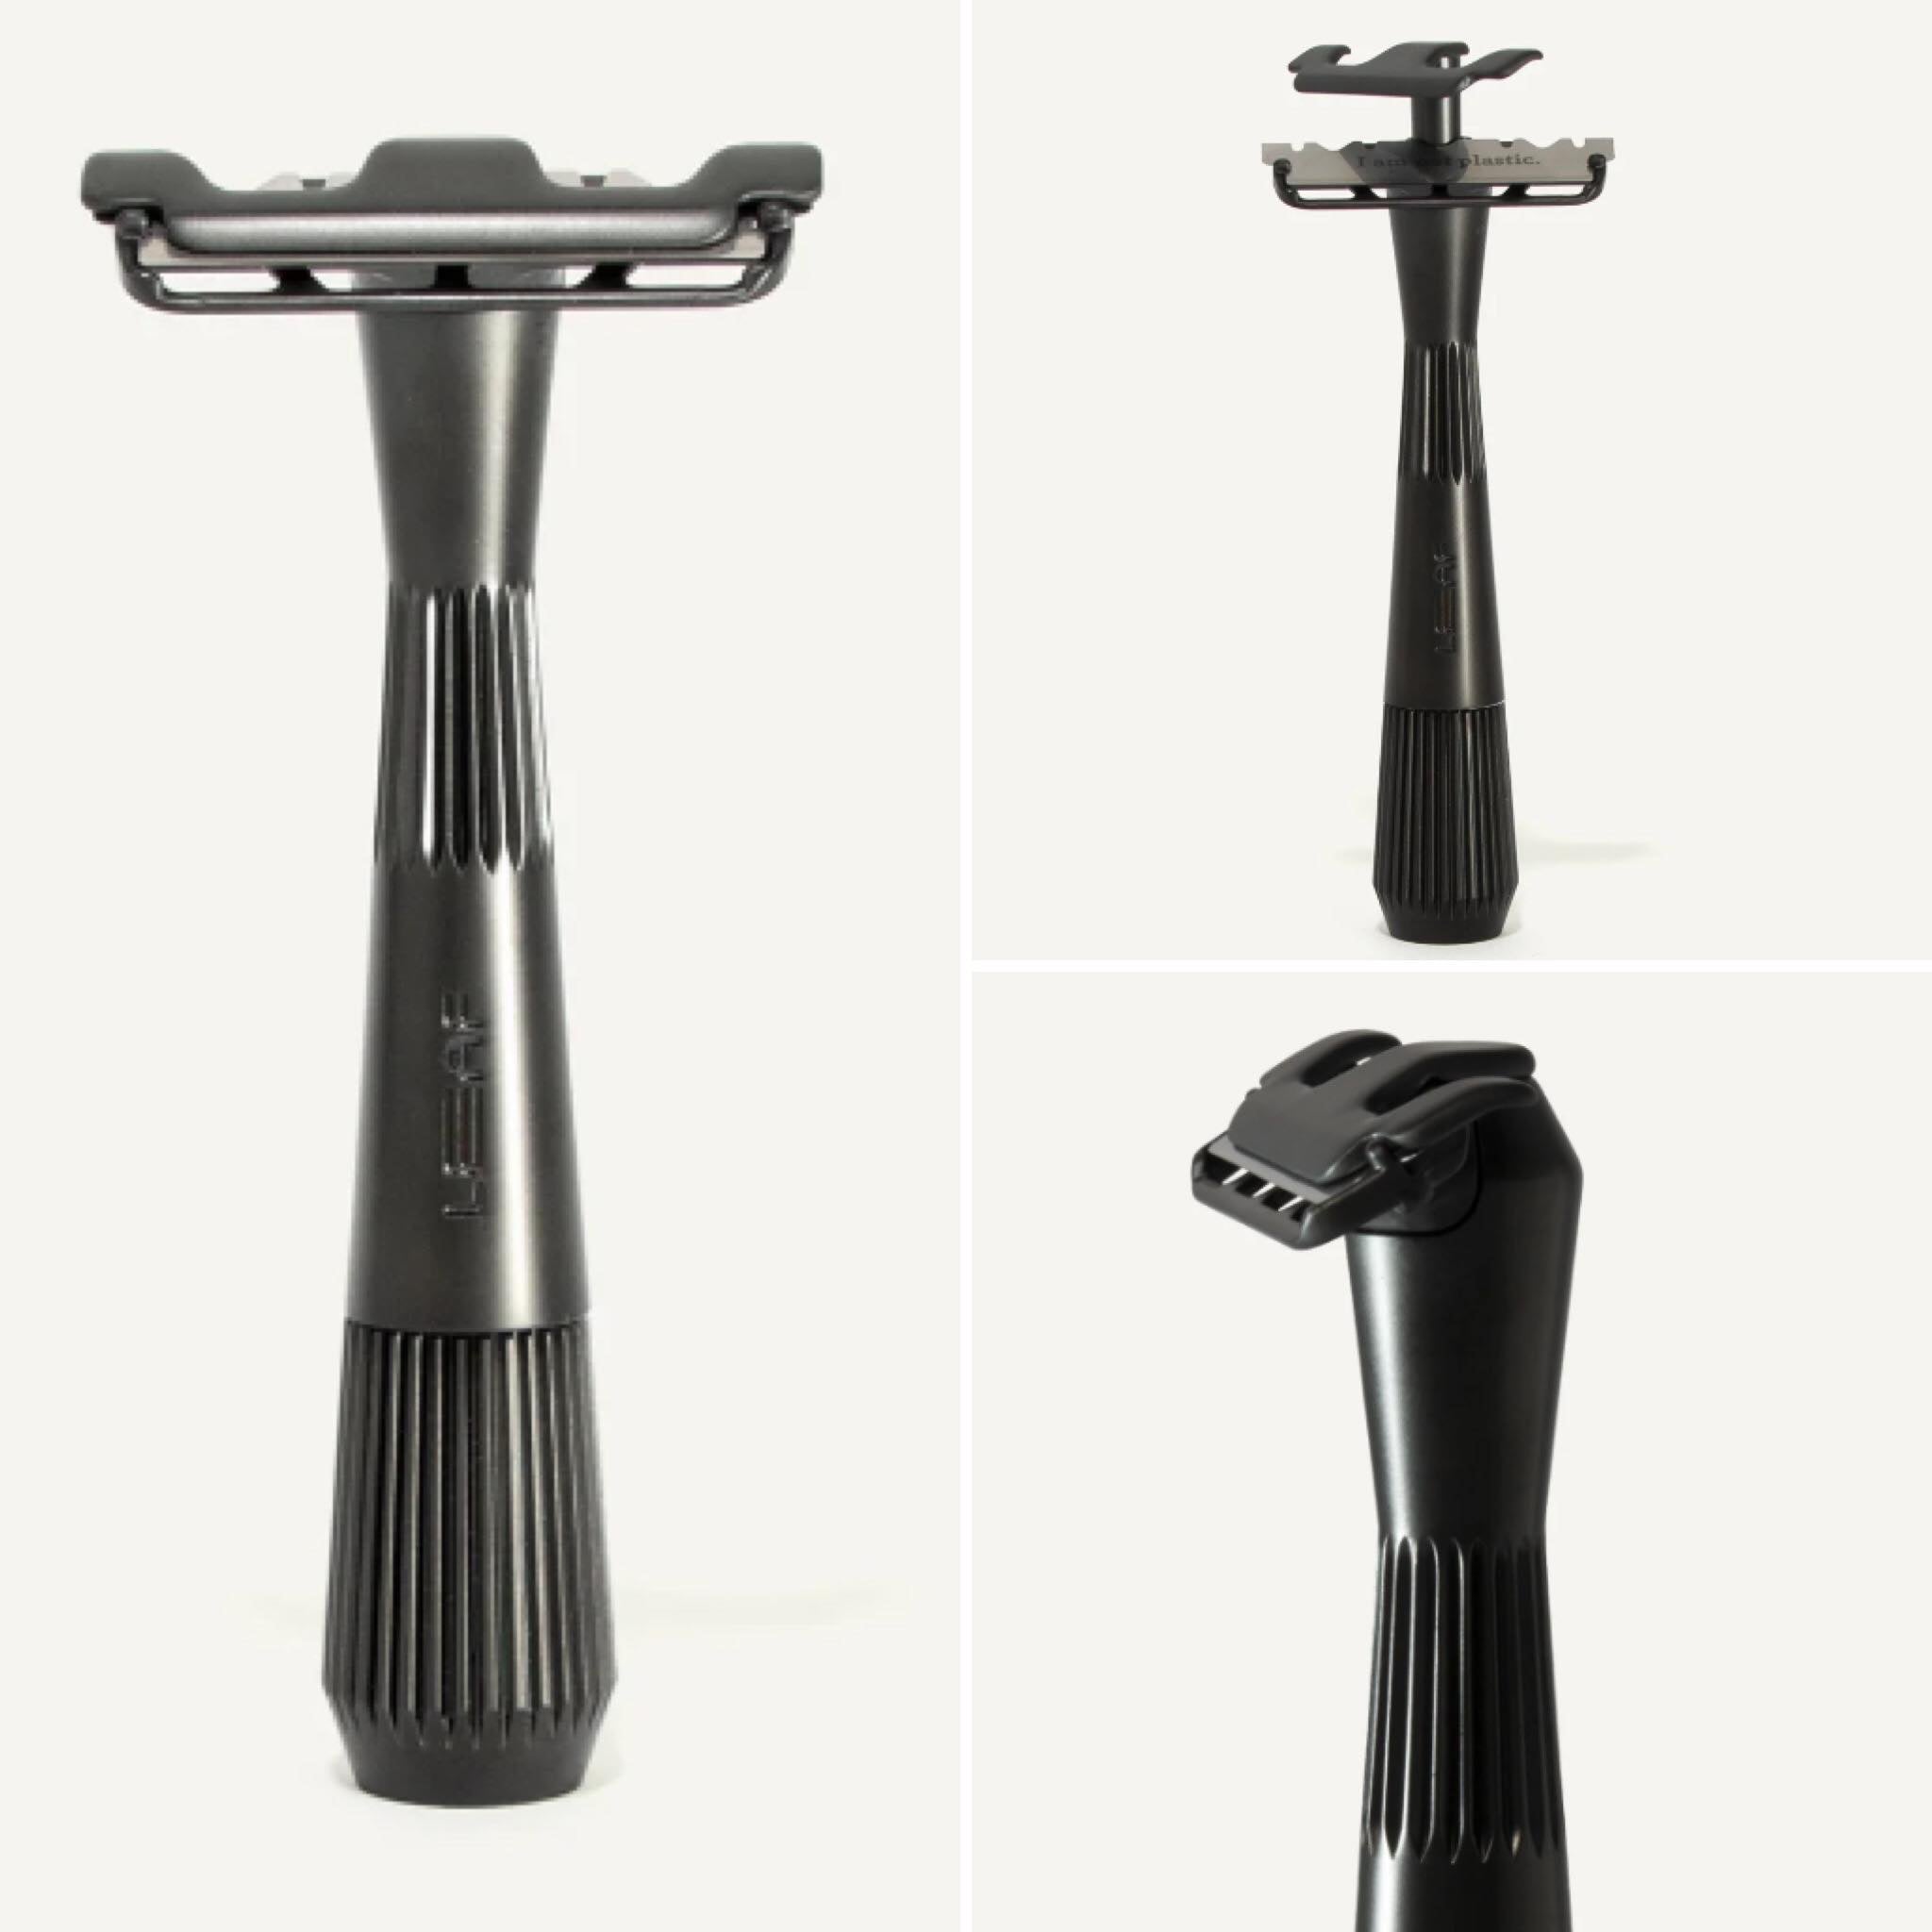 The Twig Razor with a black finish is a  single edge razor reimagined for sensitive skin, safe-use, and small places.